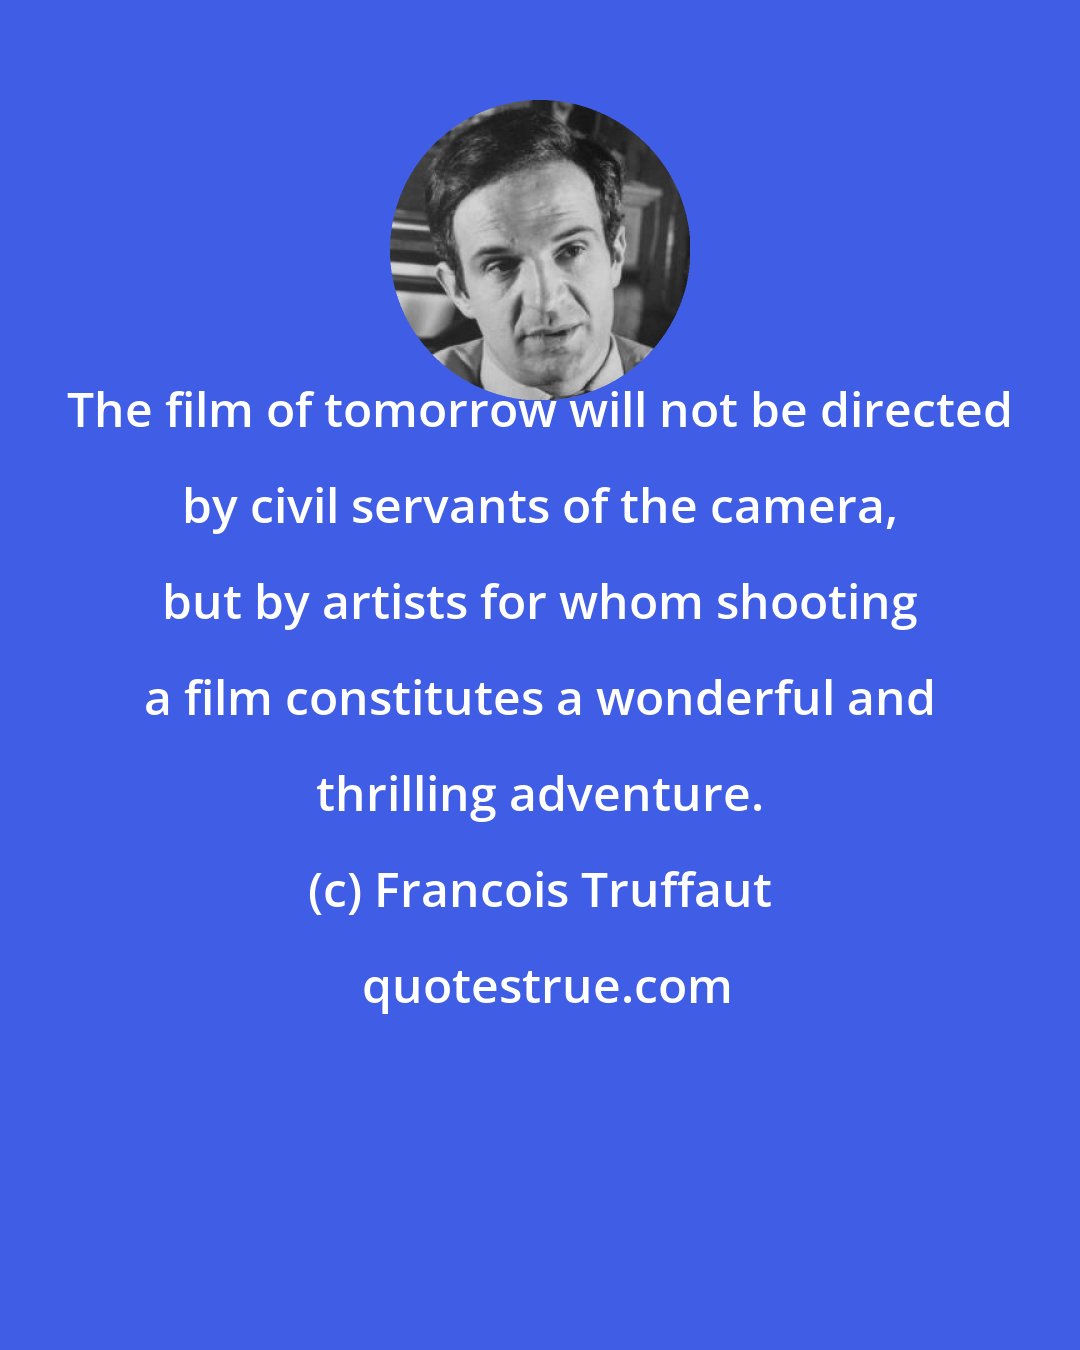 Francois Truffaut: The film of tomorrow will not be directed by civil servants of the camera, but by artists for whom shooting a film constitutes a wonderful and thrilling adventure.